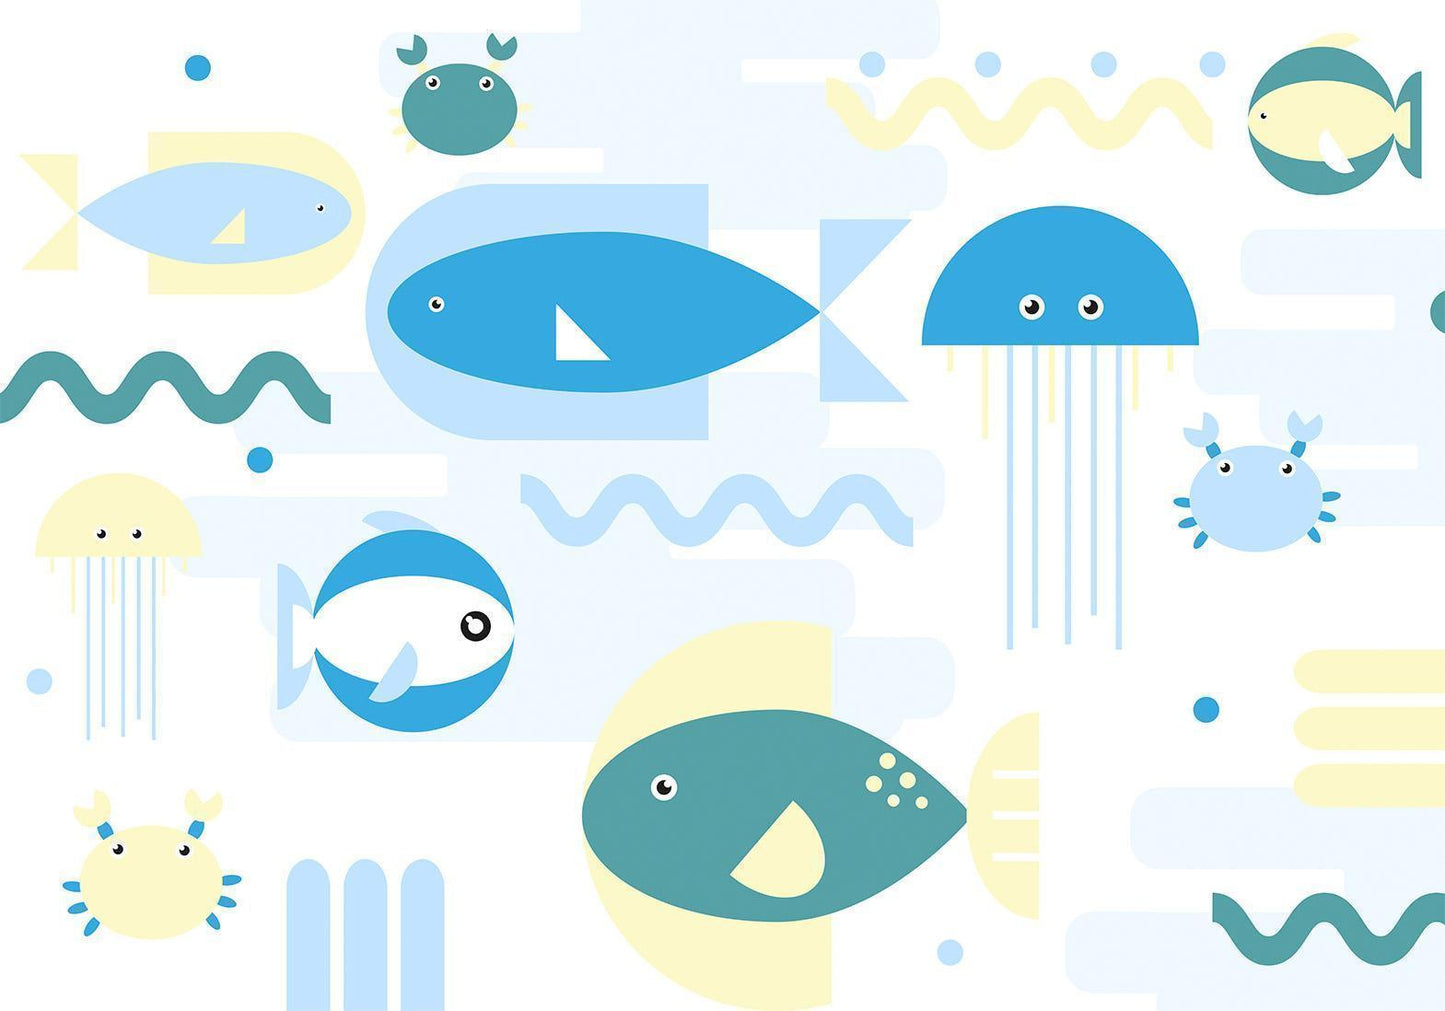 Fotobehang - Animals in the sea - geometric blue fish in water for kids